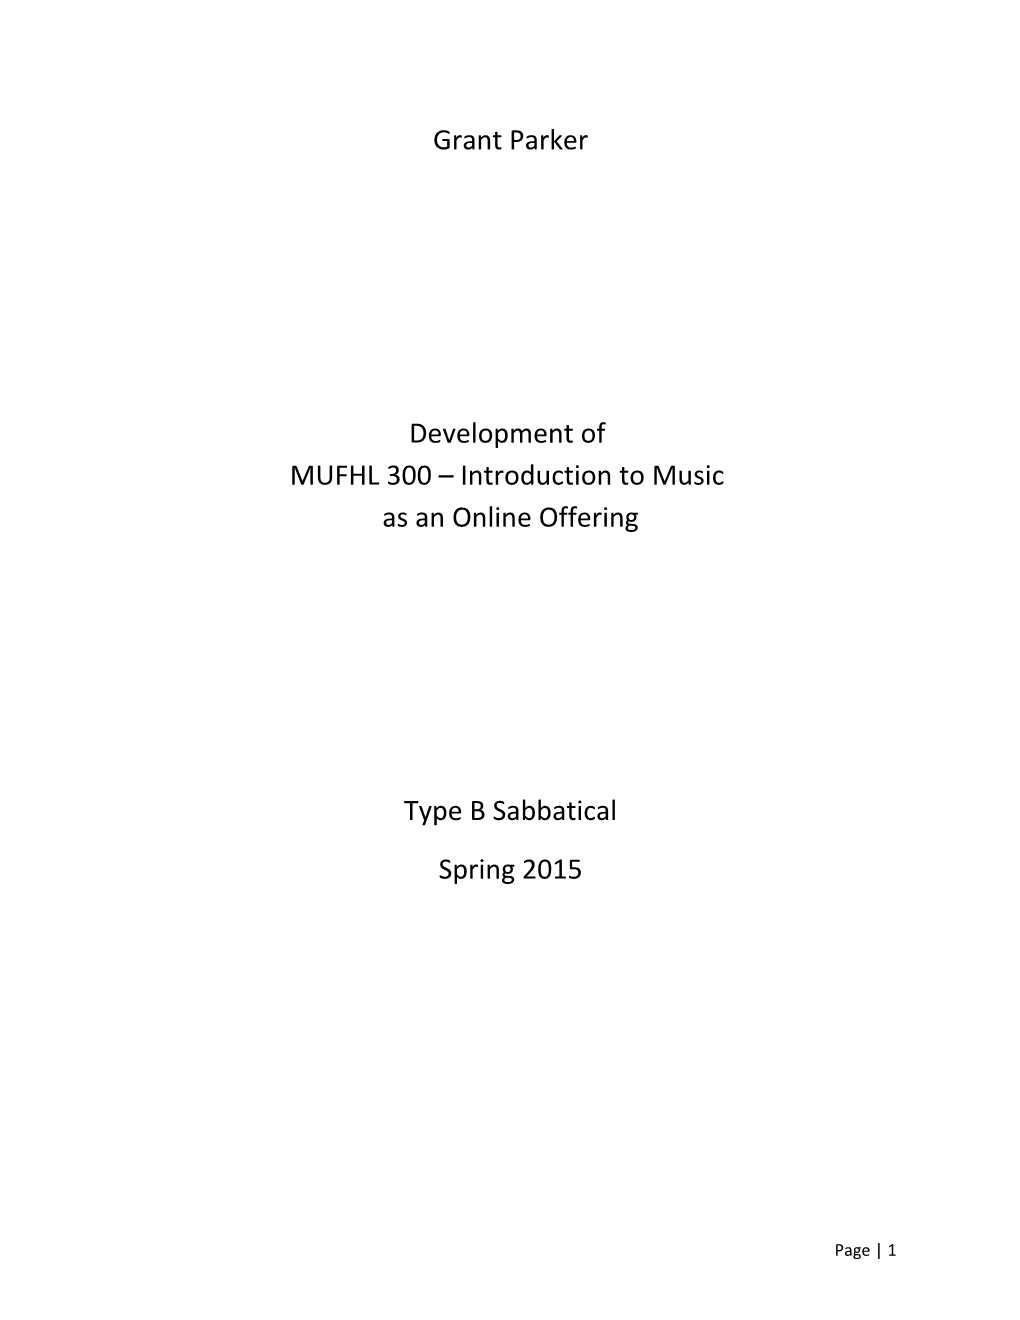 Project Title:Development of MUFHL 300 Introduction to Music As an Online Offering